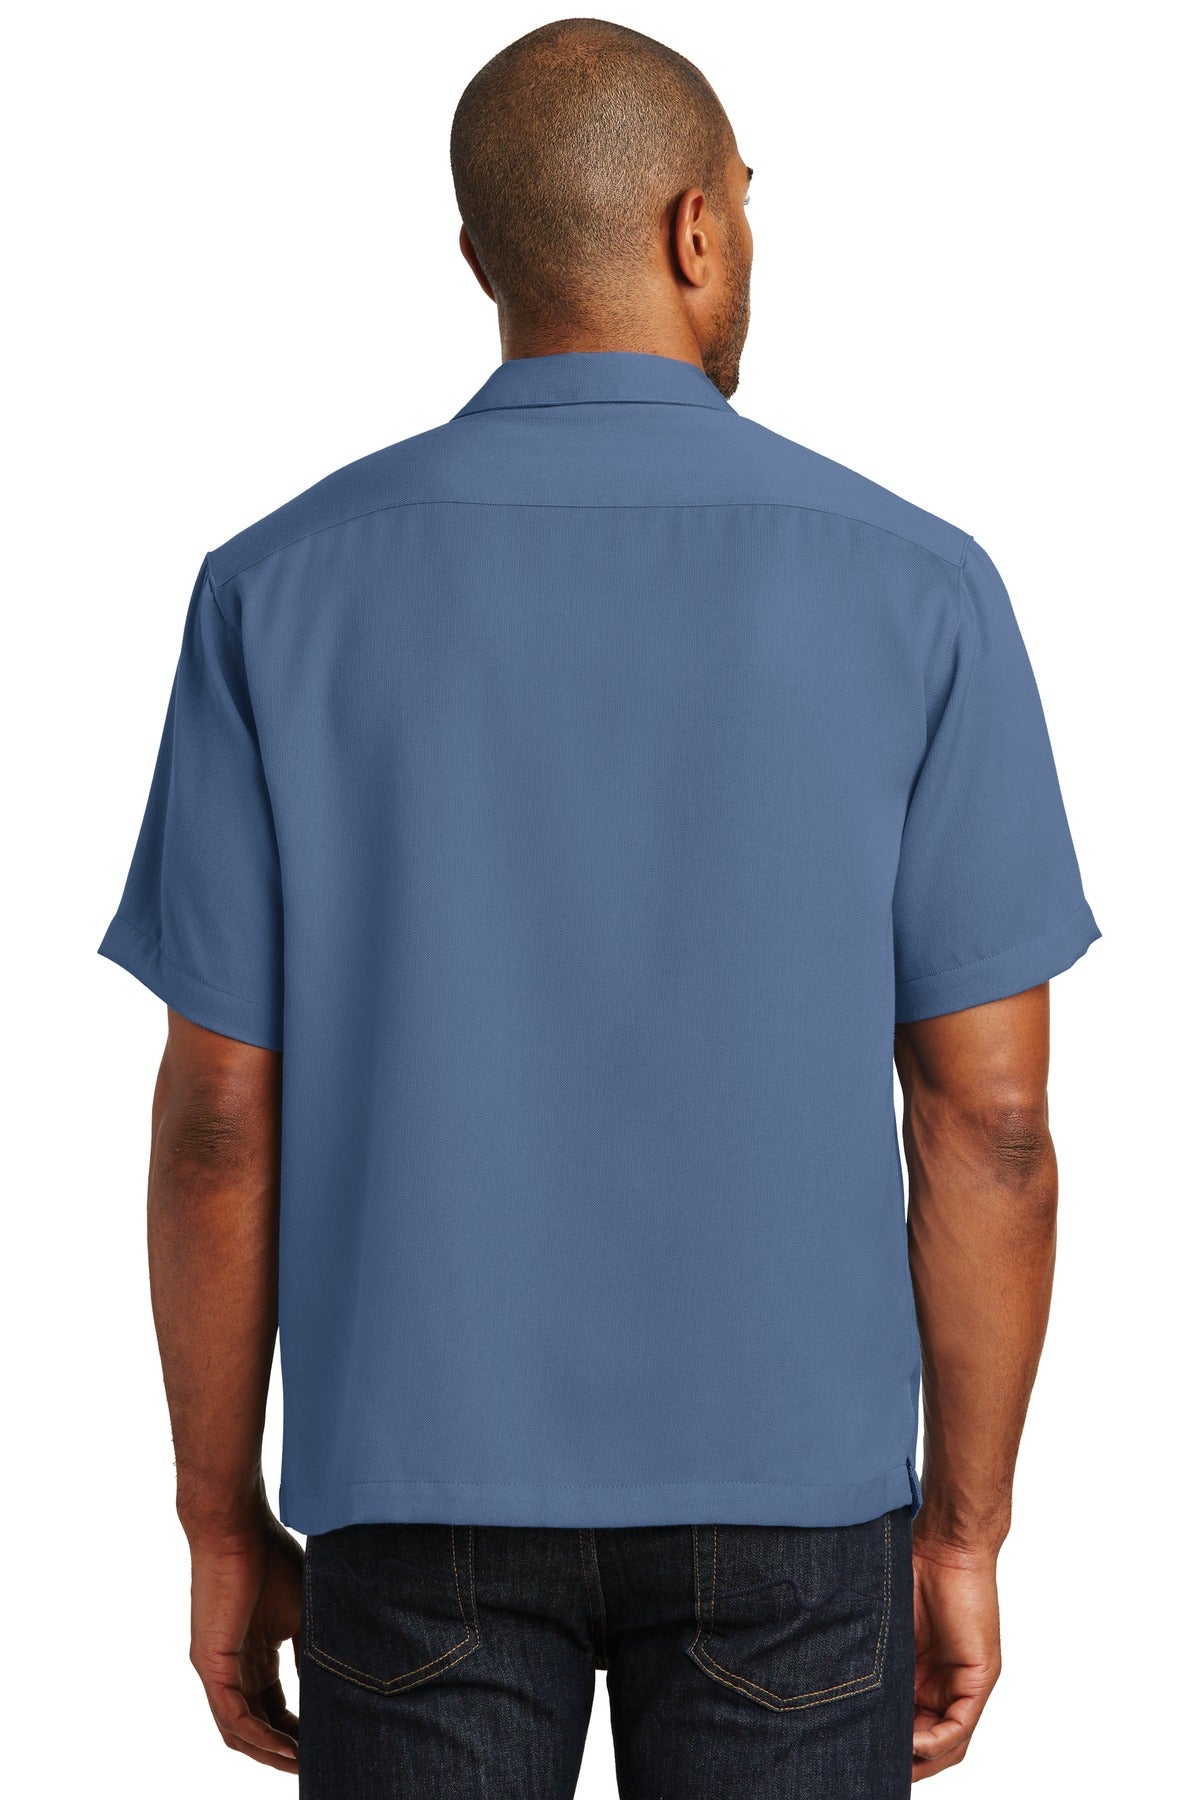 Port Authority Easy Care Camp Shirt. S535